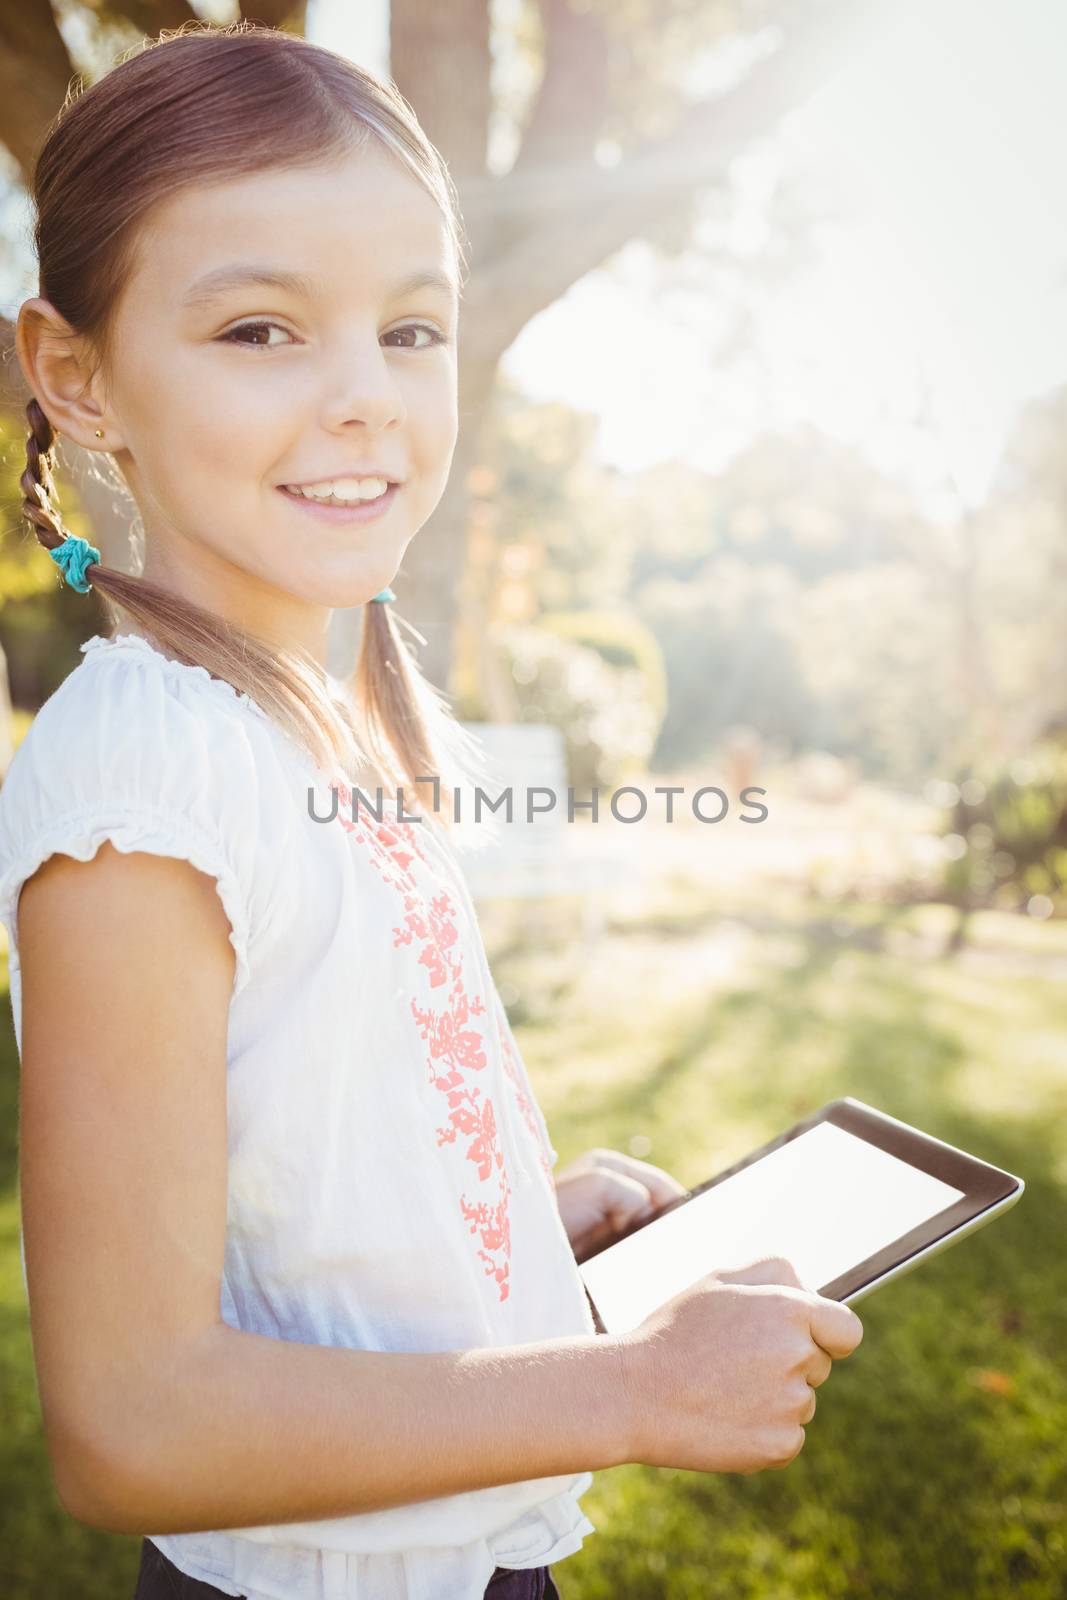 Kid using technology during a sunny day by Wavebreakmedia